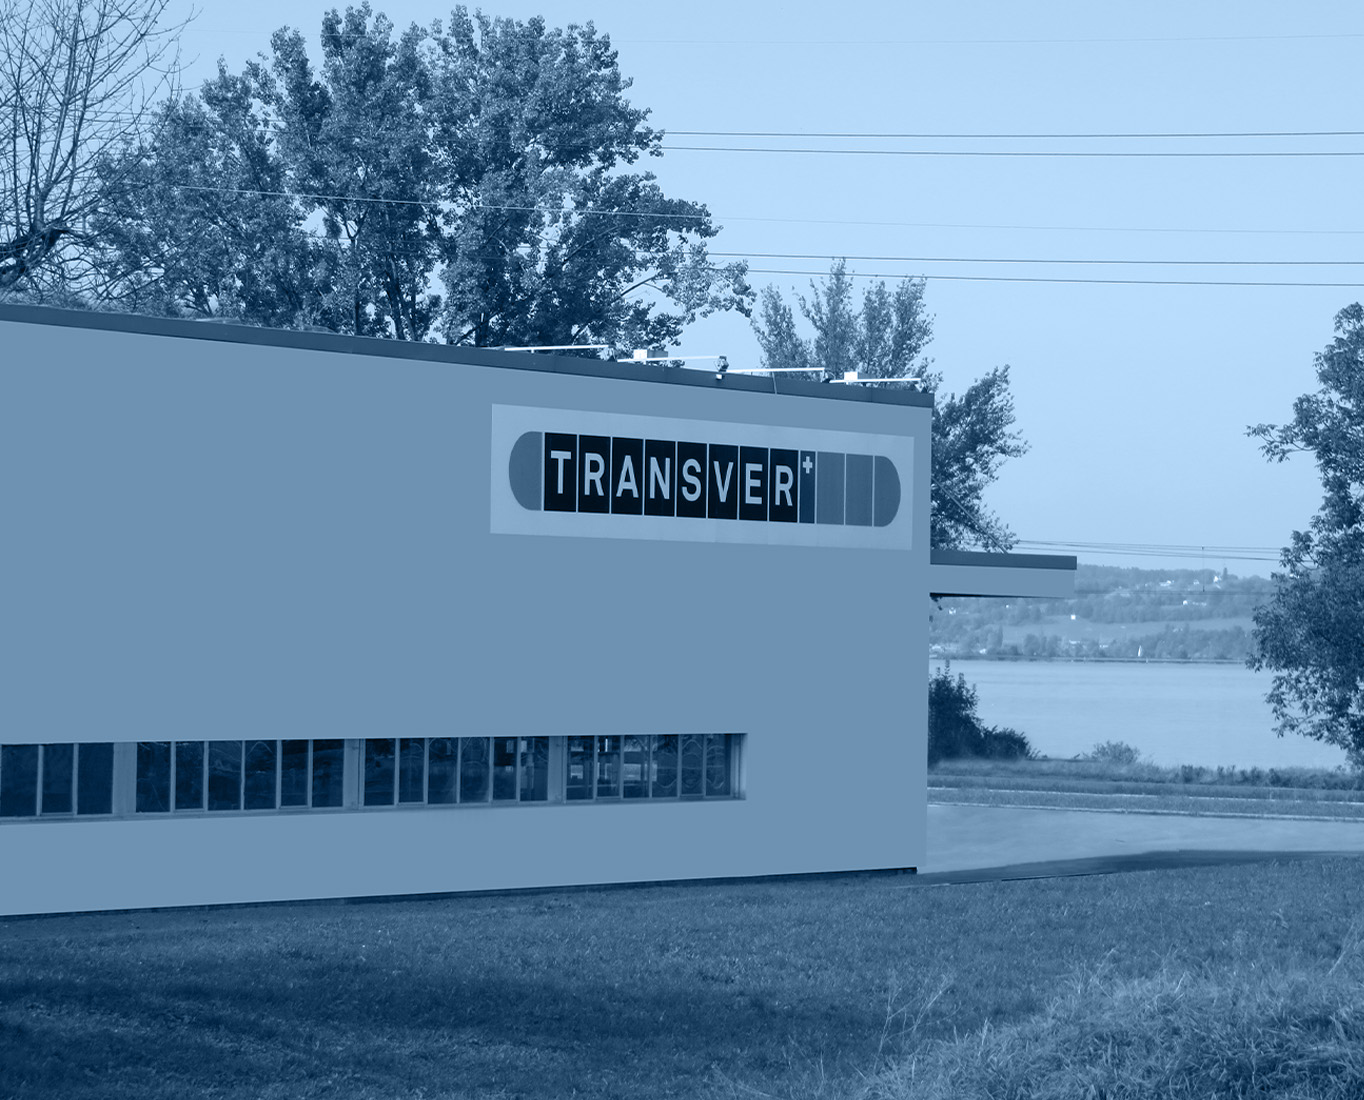 Production facility of Transver.